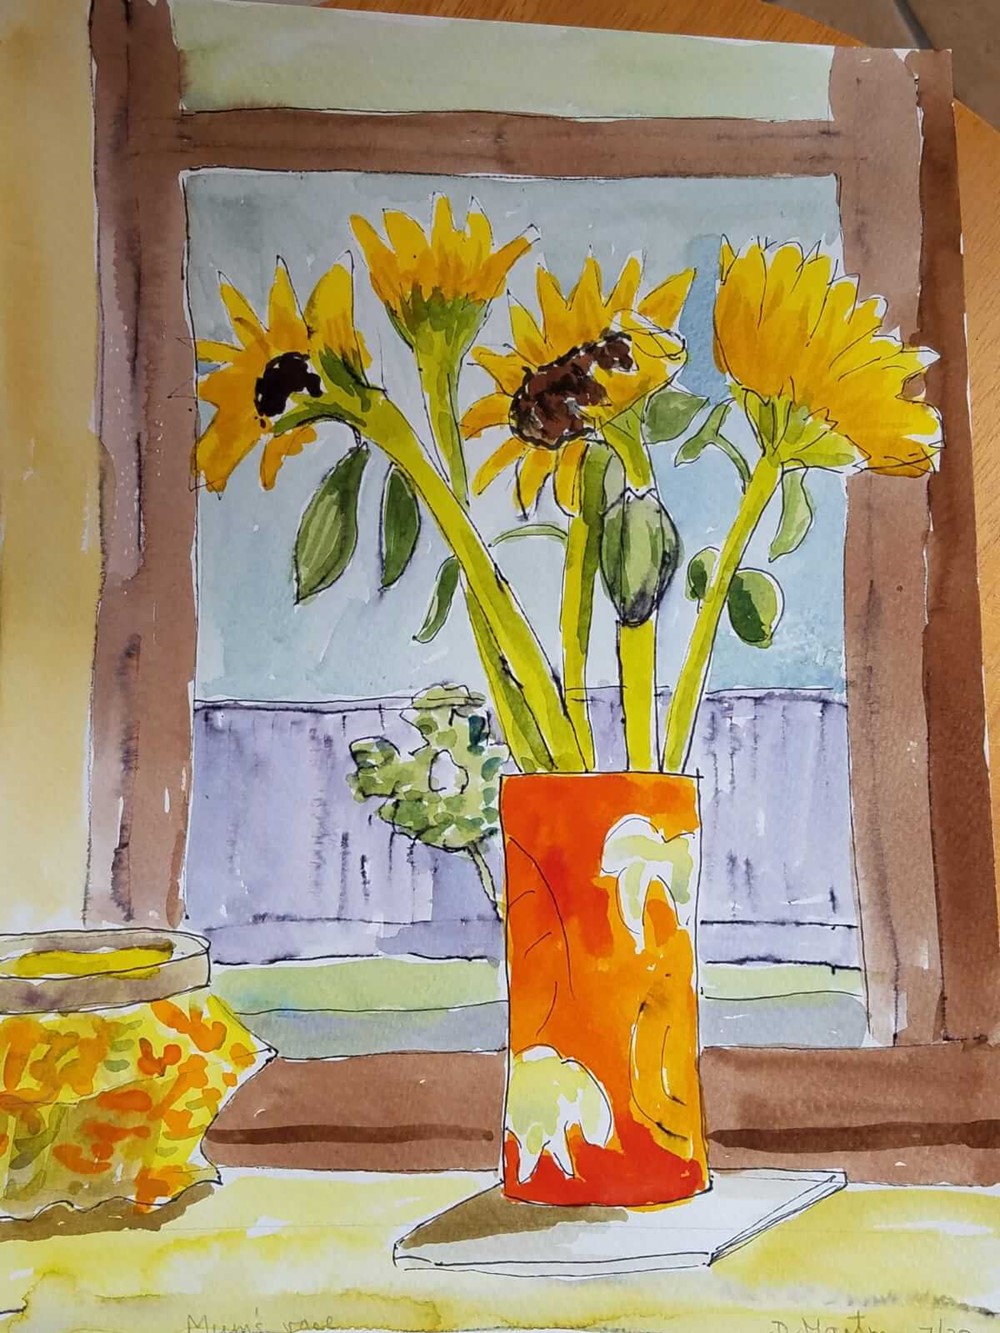 Student work of a sunflower drawing from a drawing course